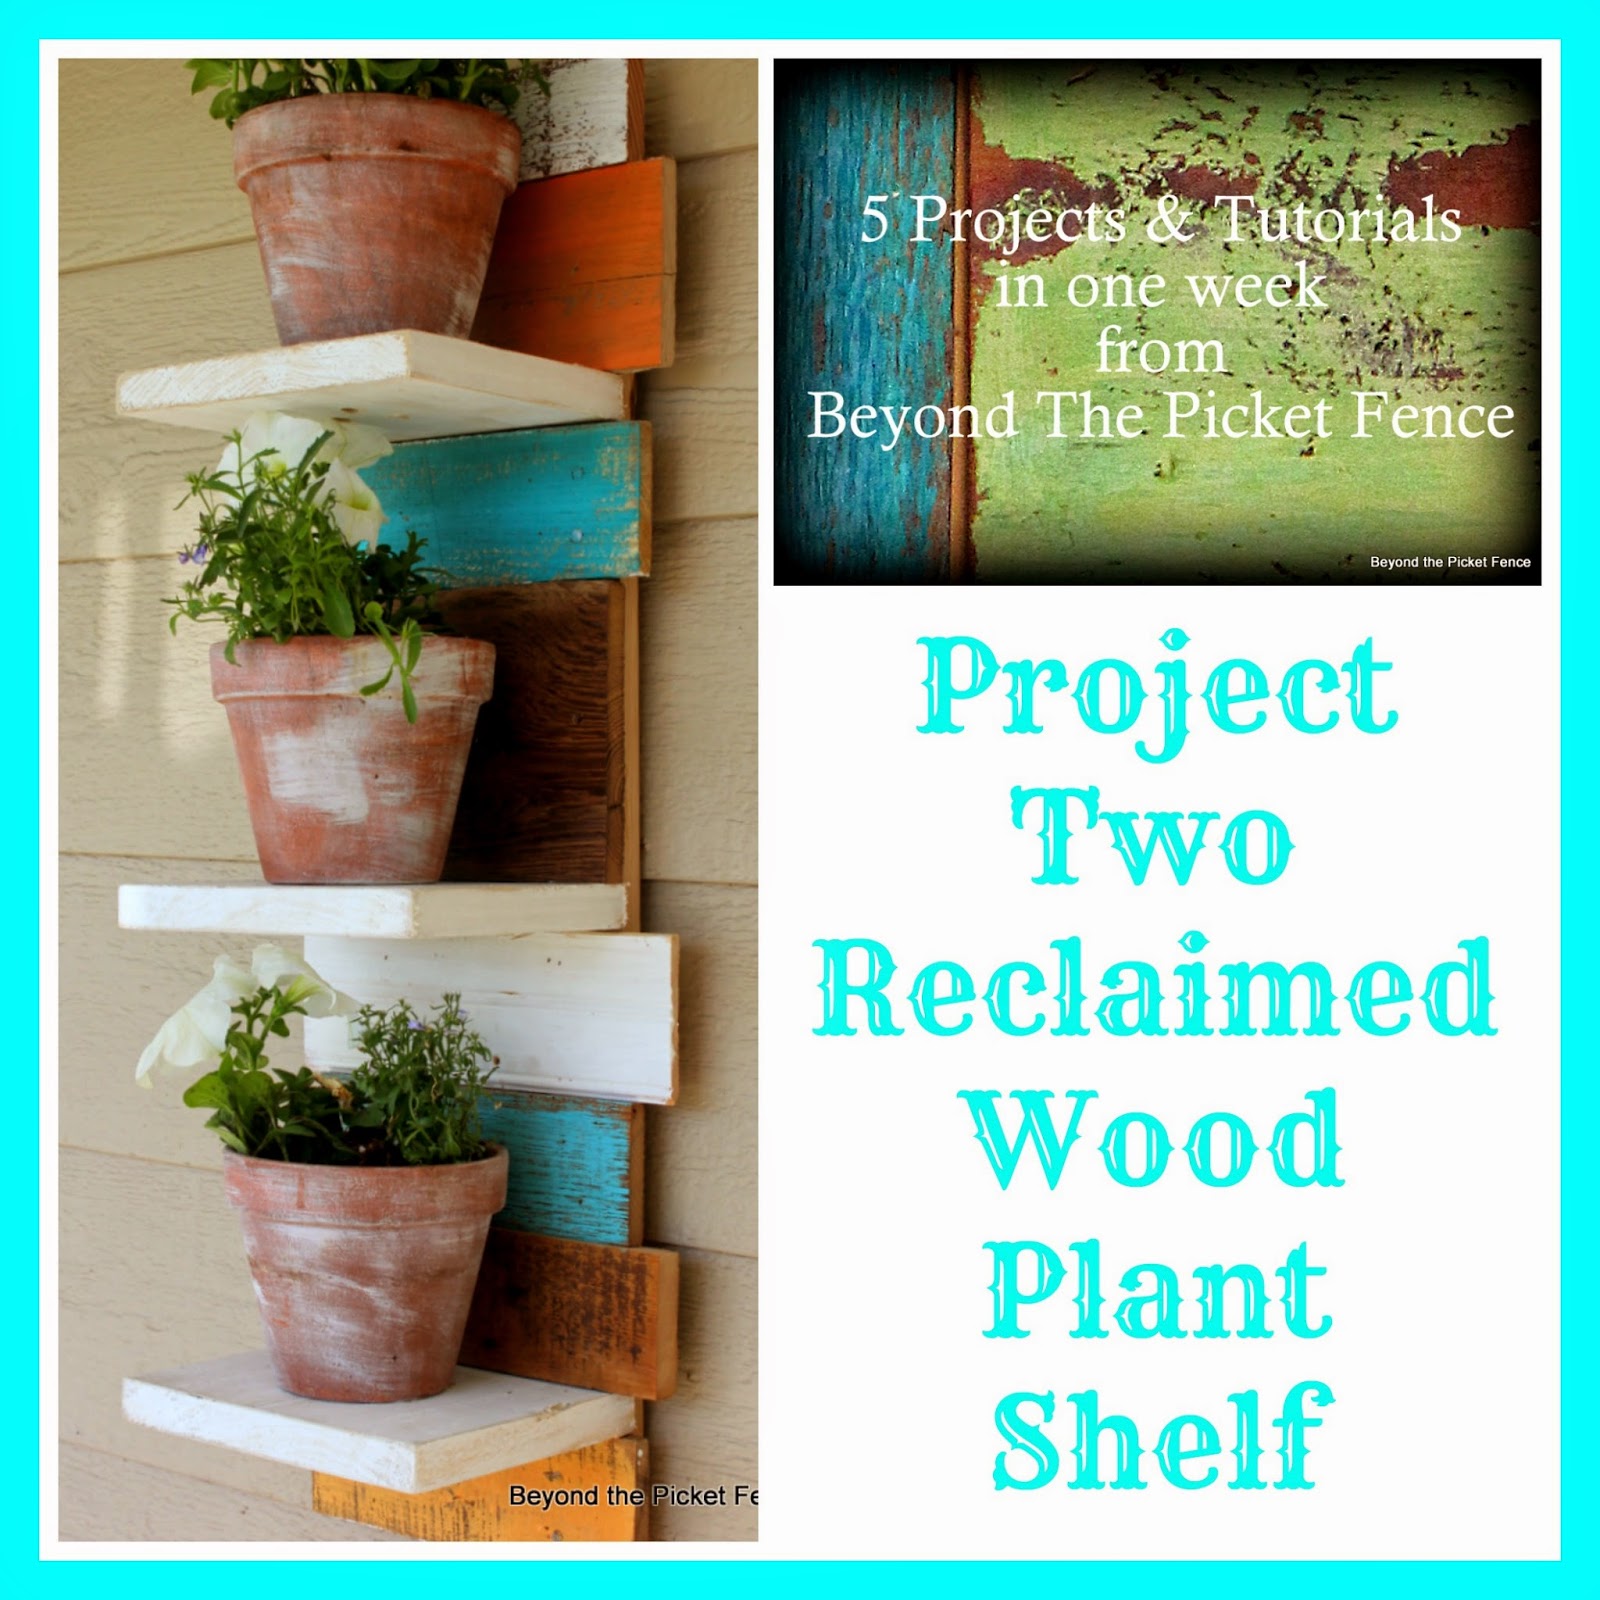 5 projects in one week project 2 reclaimed wood plant shelf http://bec4-beyondthepicketfence.blogspot.com/2014/05/5-projects-in-week-project-2-reclaimed.html